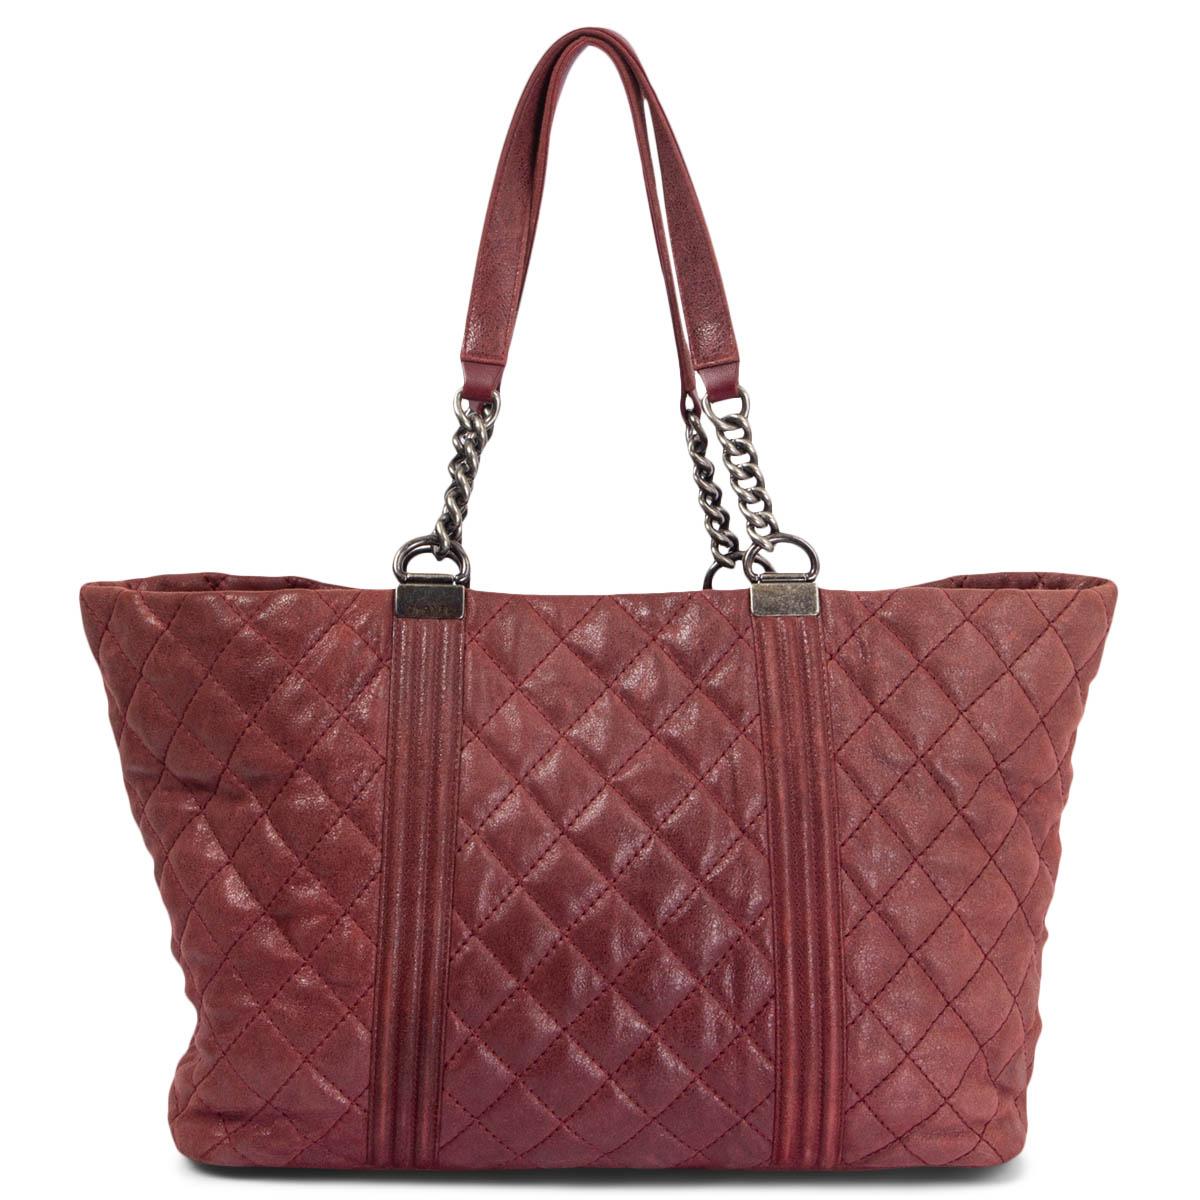 Women's CHANEL burgundy iridescent leather GENTLE BOY Shopping Tote Bag For Sale